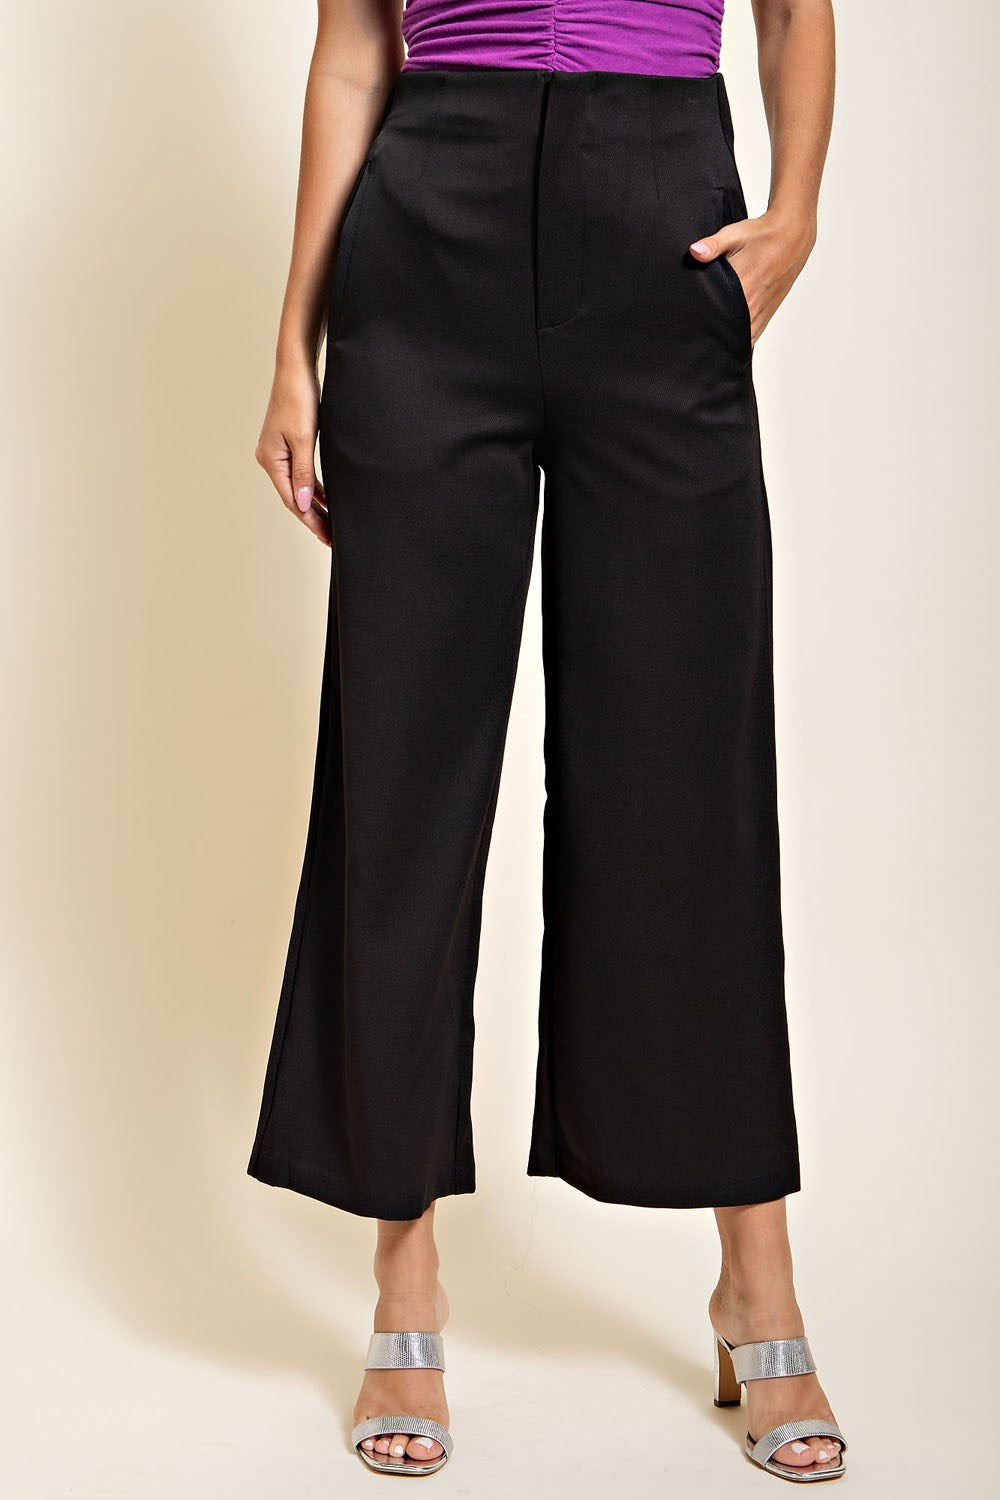 Mallory Black Cropped High Waisted Pants